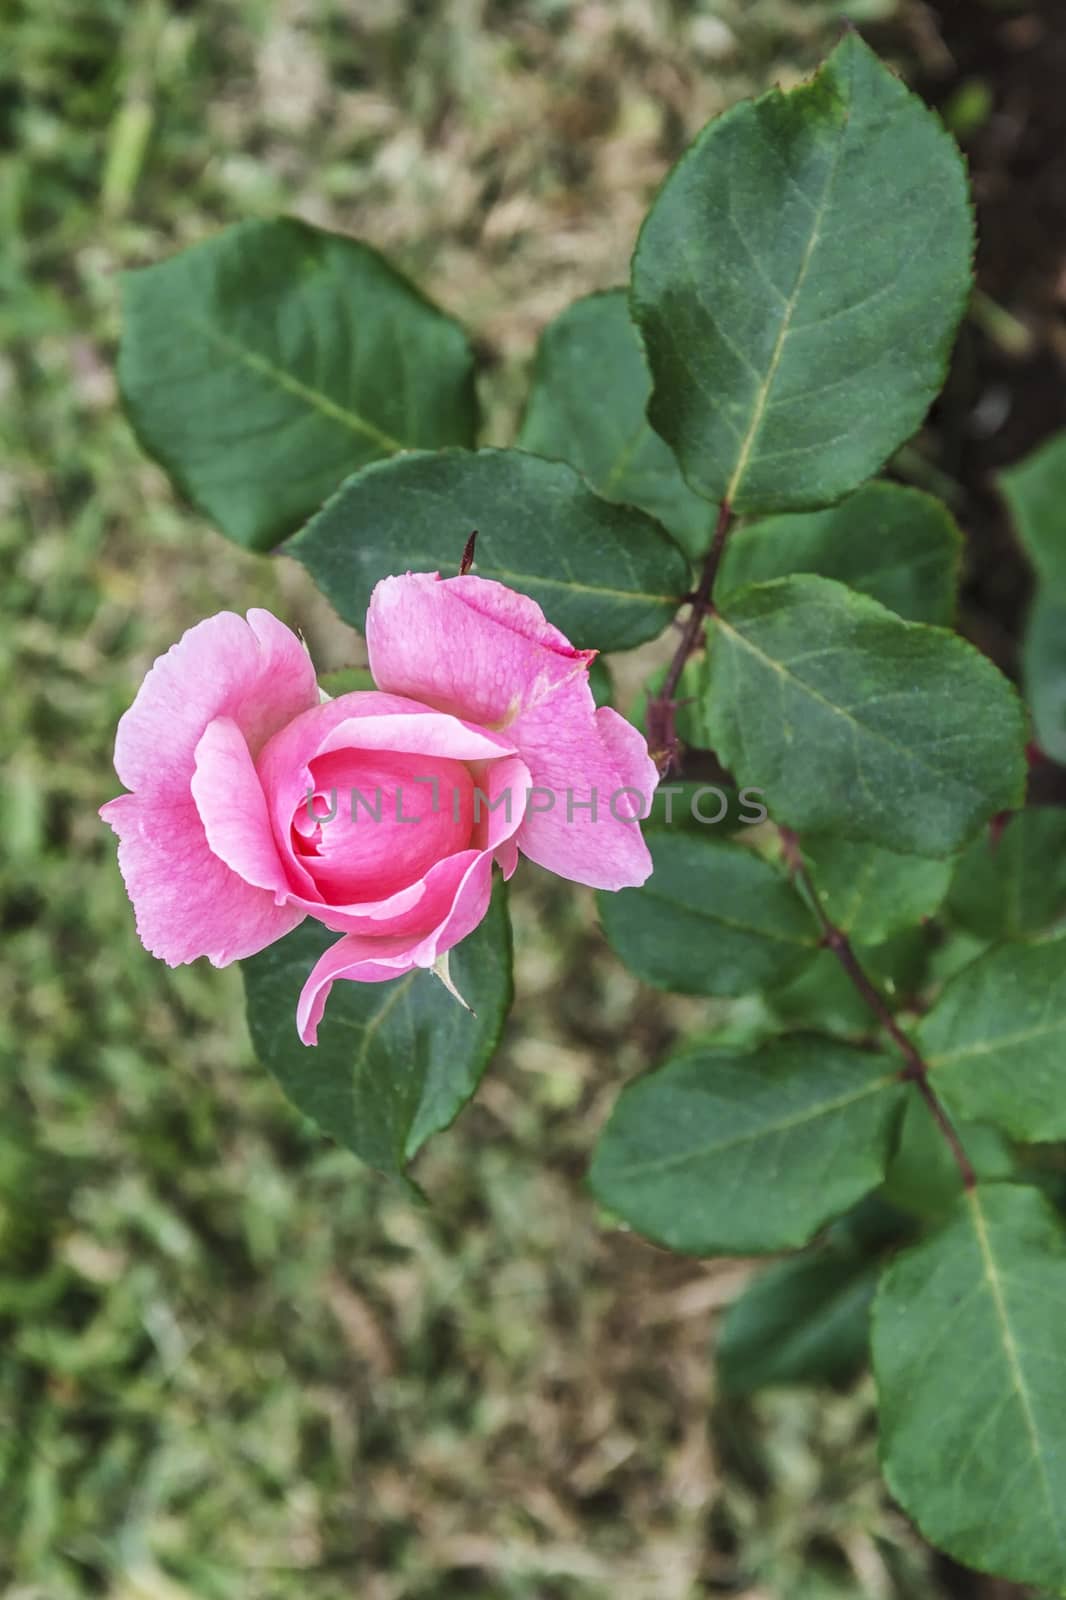 Rose bud close-up with foliage, top view, blurred background by Grommik